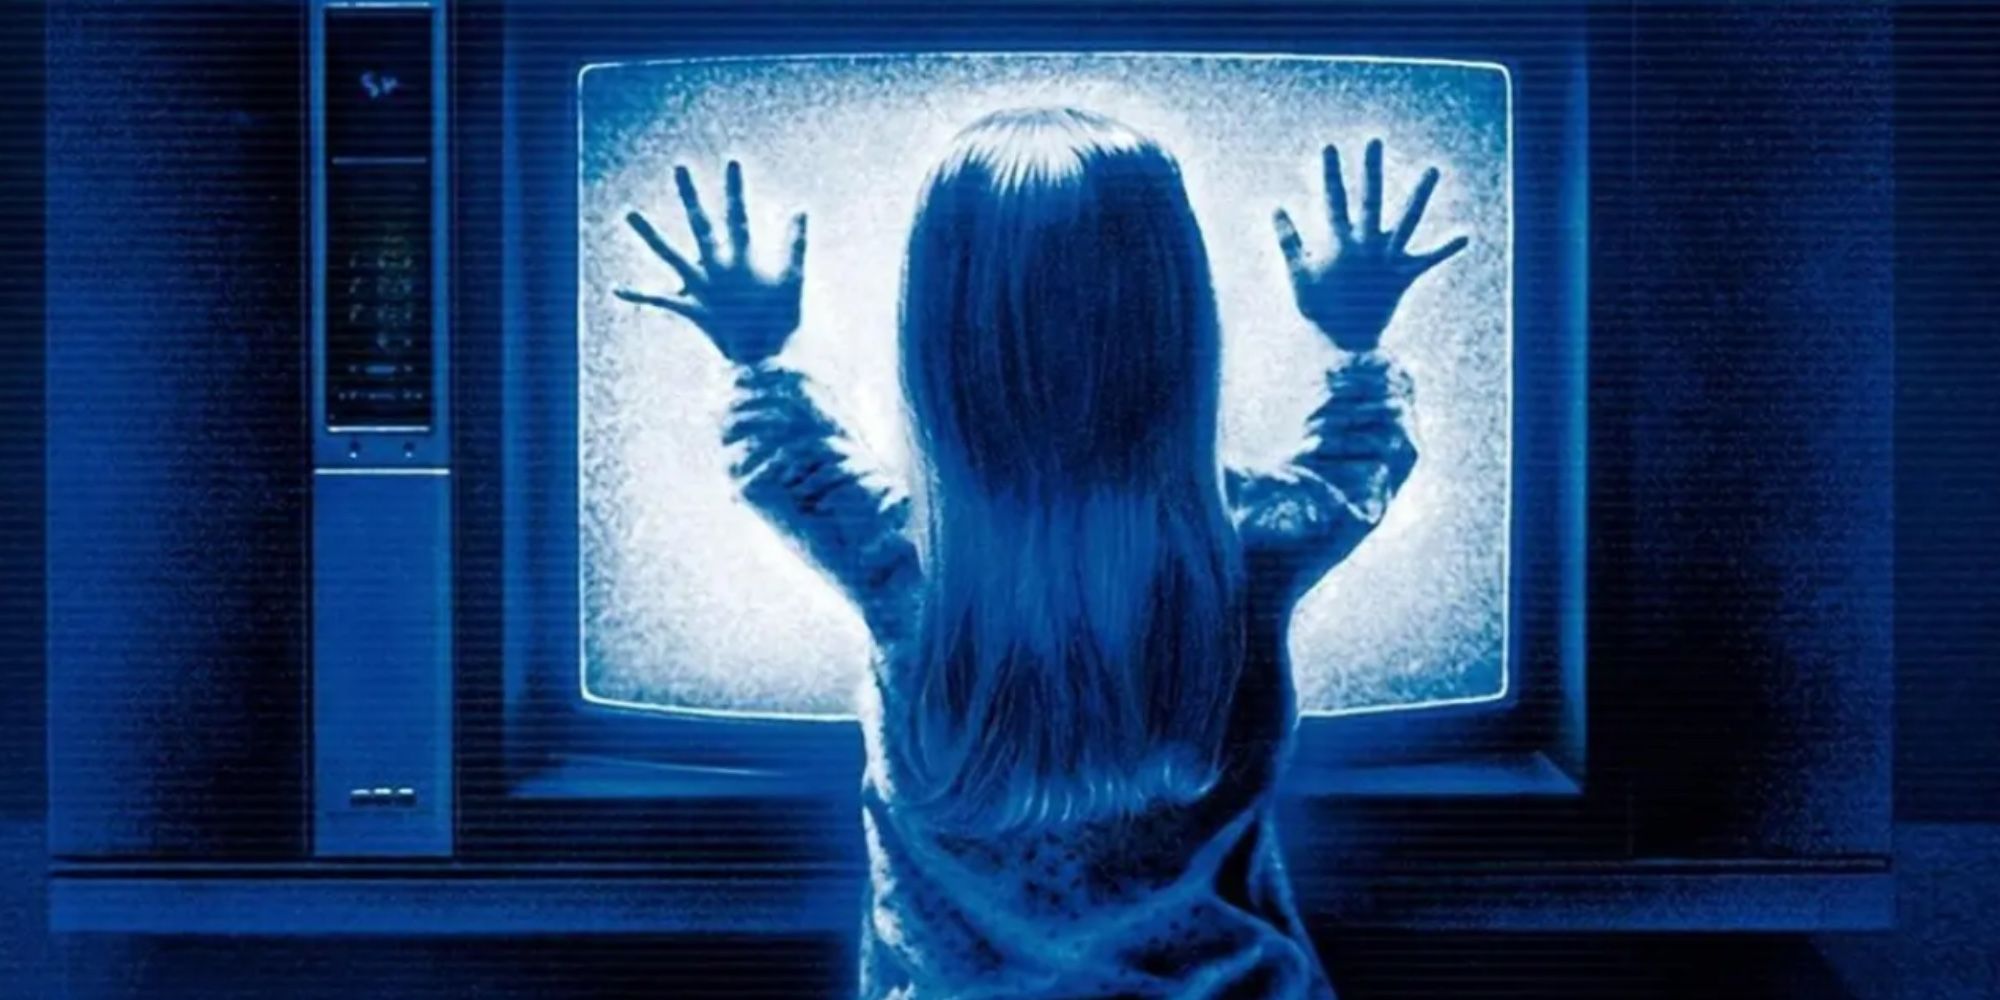 Child in front of television screen in Poltergeist